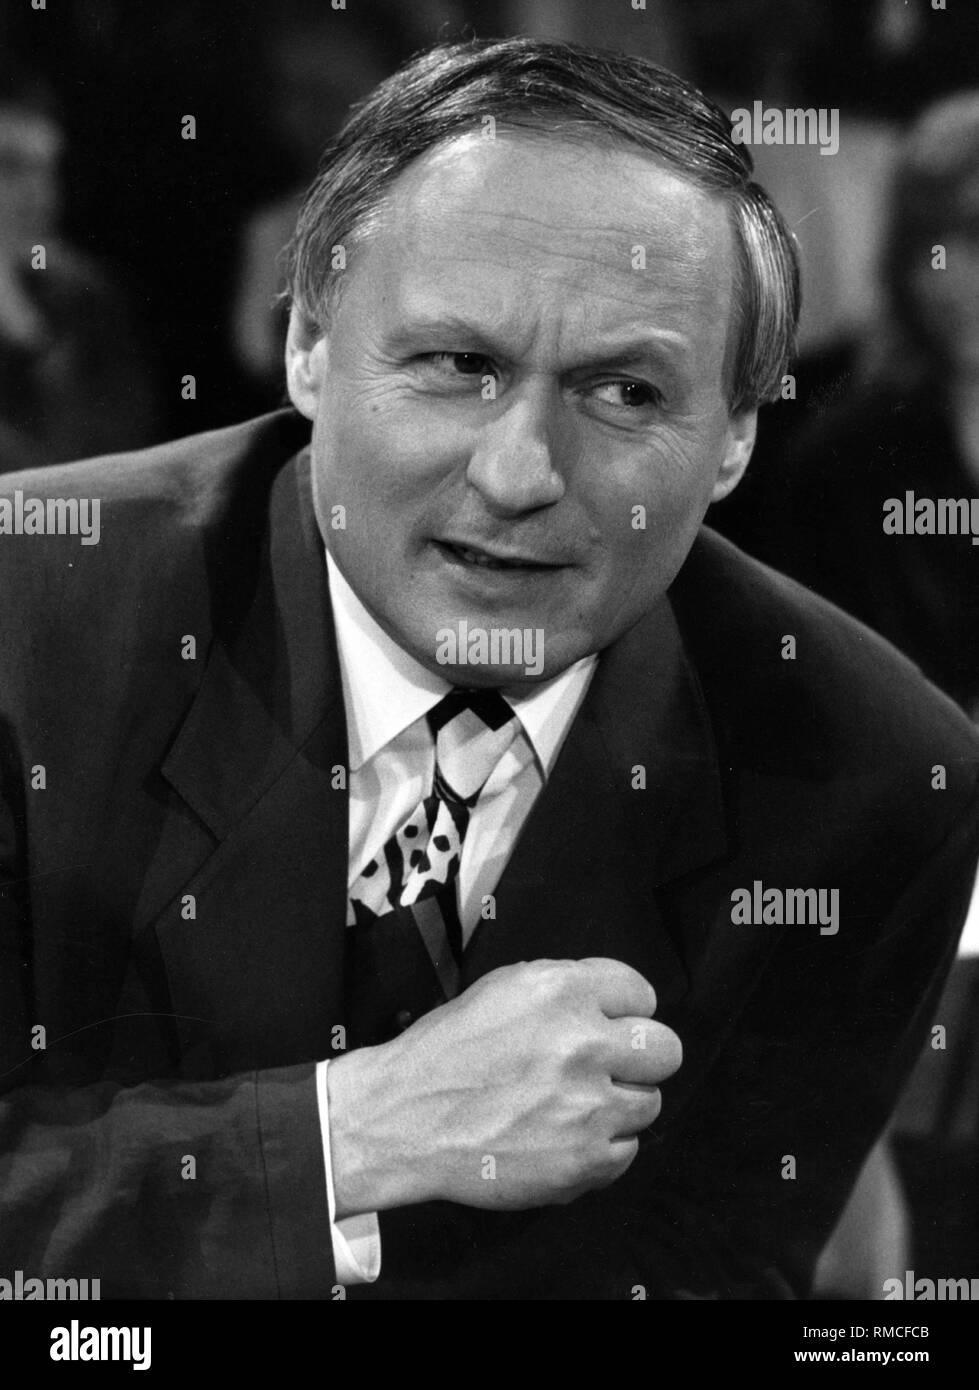 Oskar Lafontaine, Minister President of Saarland, during the general election campaign in 1990. Stock Photo